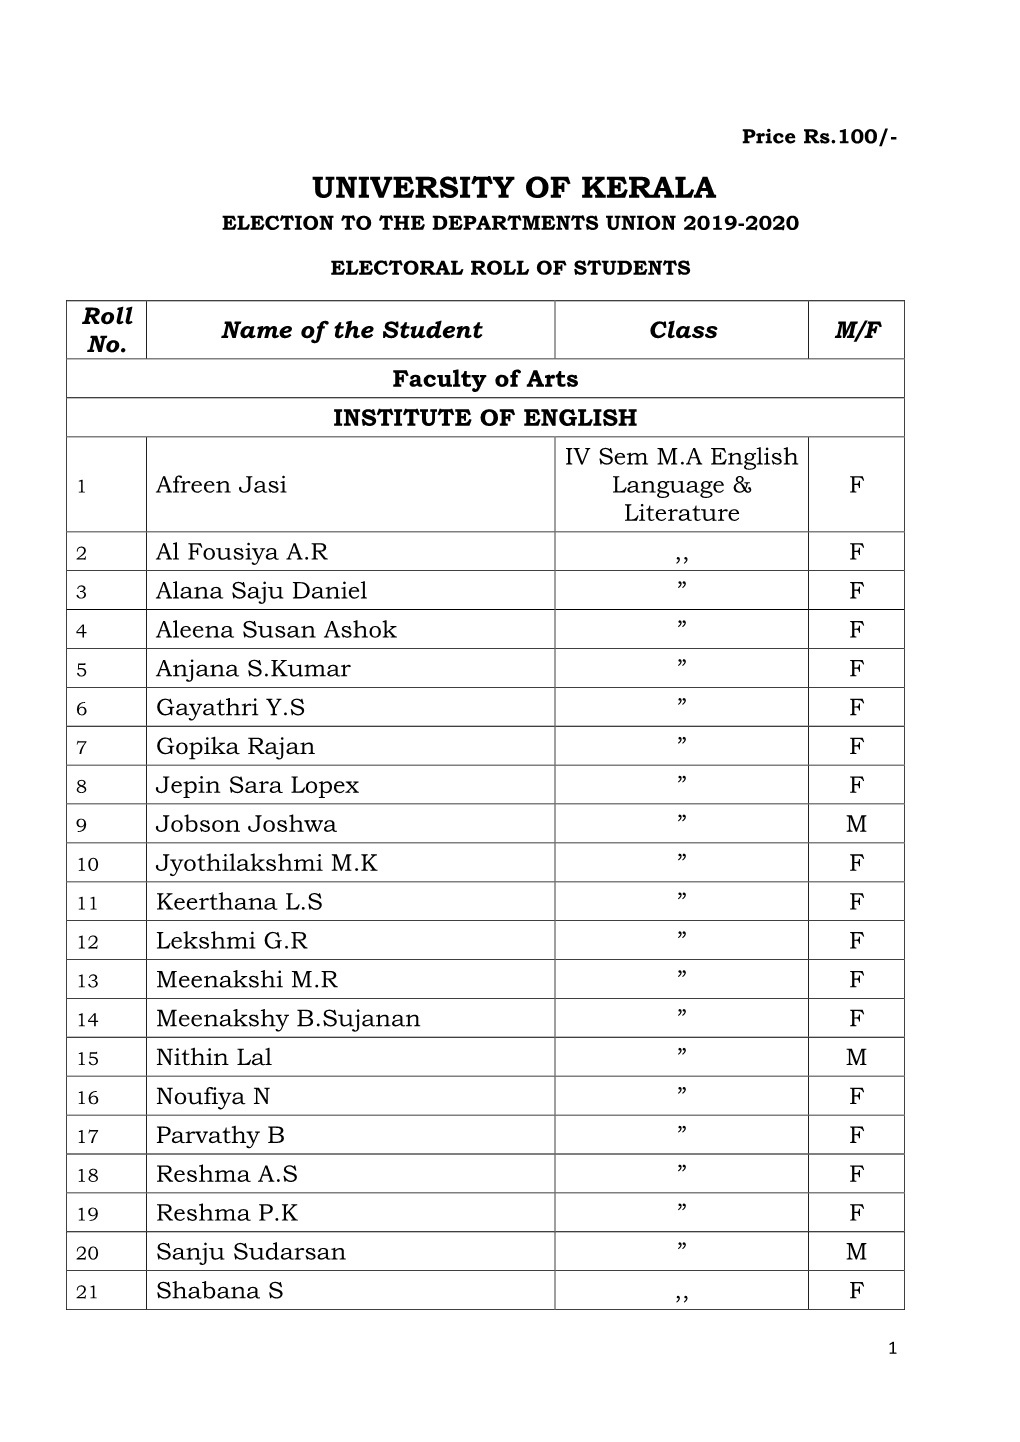 Electoral Roll of Students